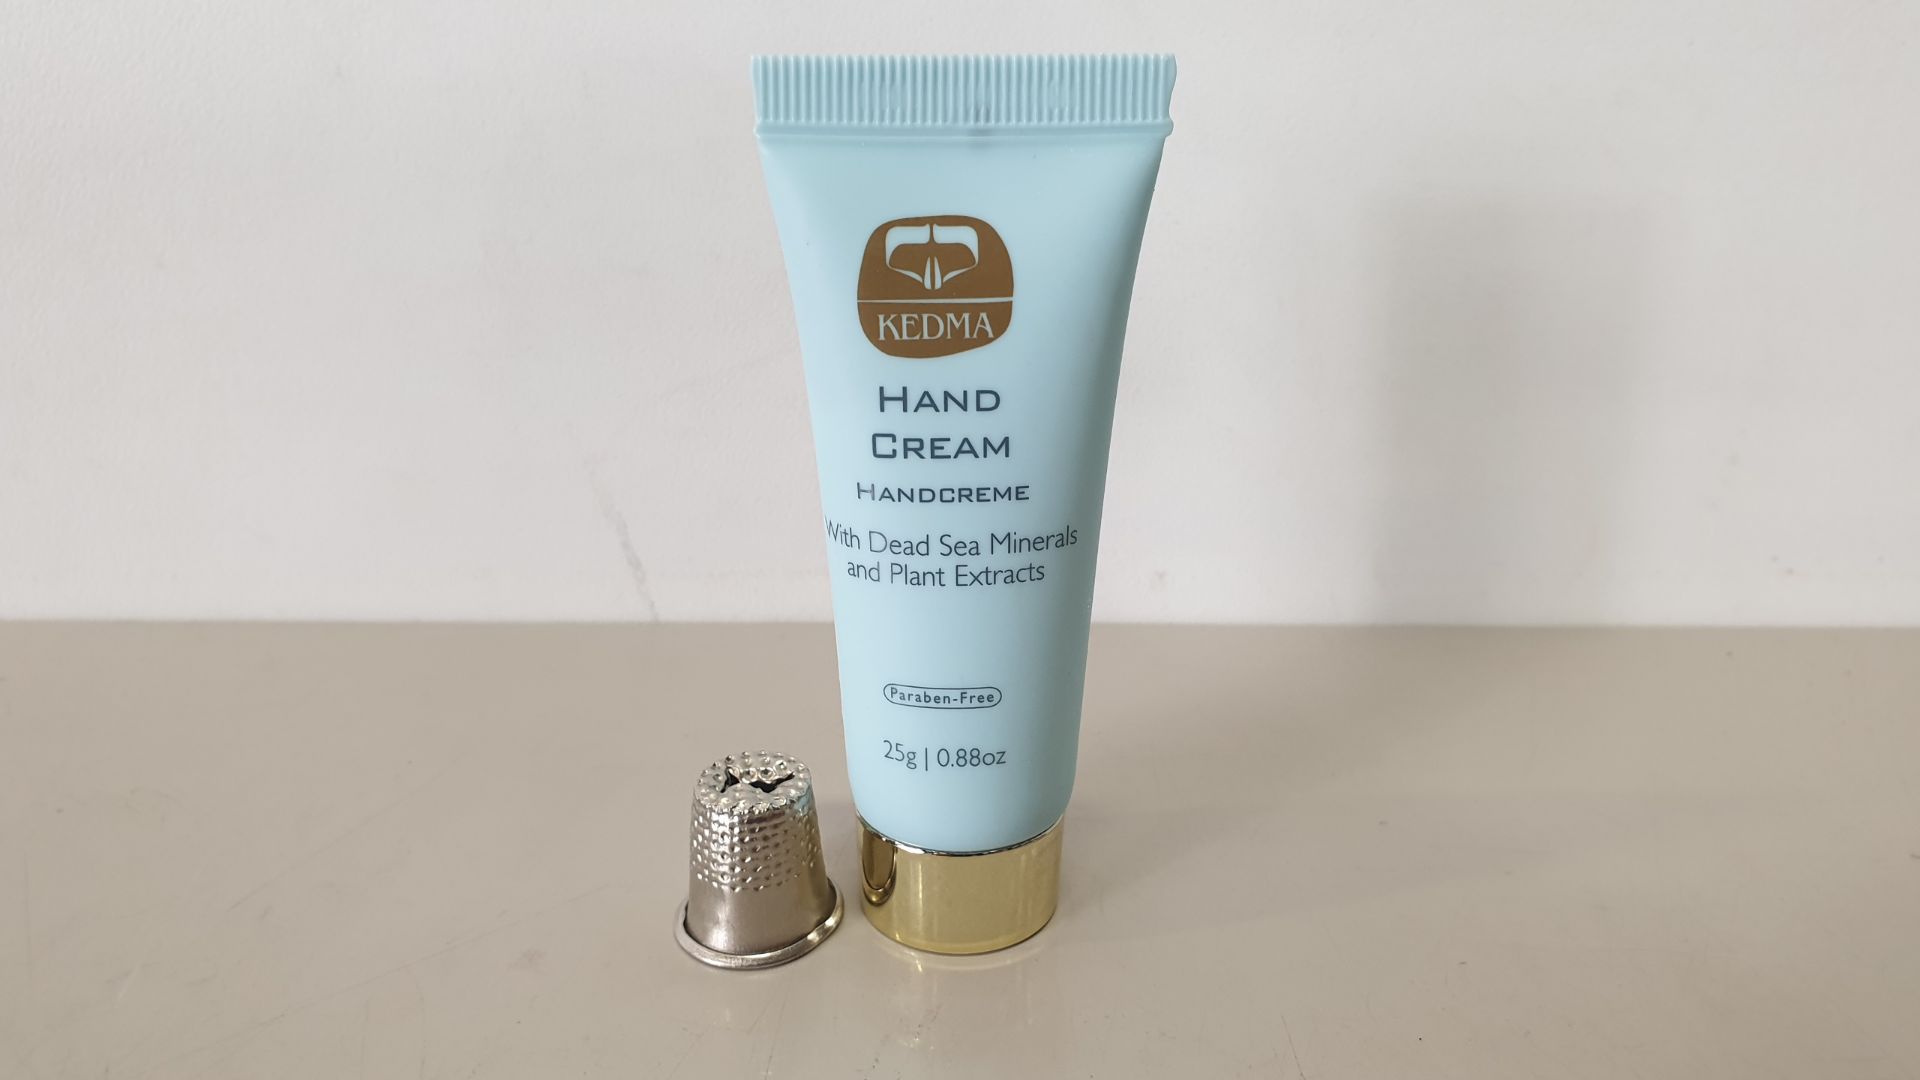 50 X BRAND NEW KEDMA HAND CREAM WITH DEAD SEA MINERALS AND PLANT EXTRACTS - 25G RRP $747.50